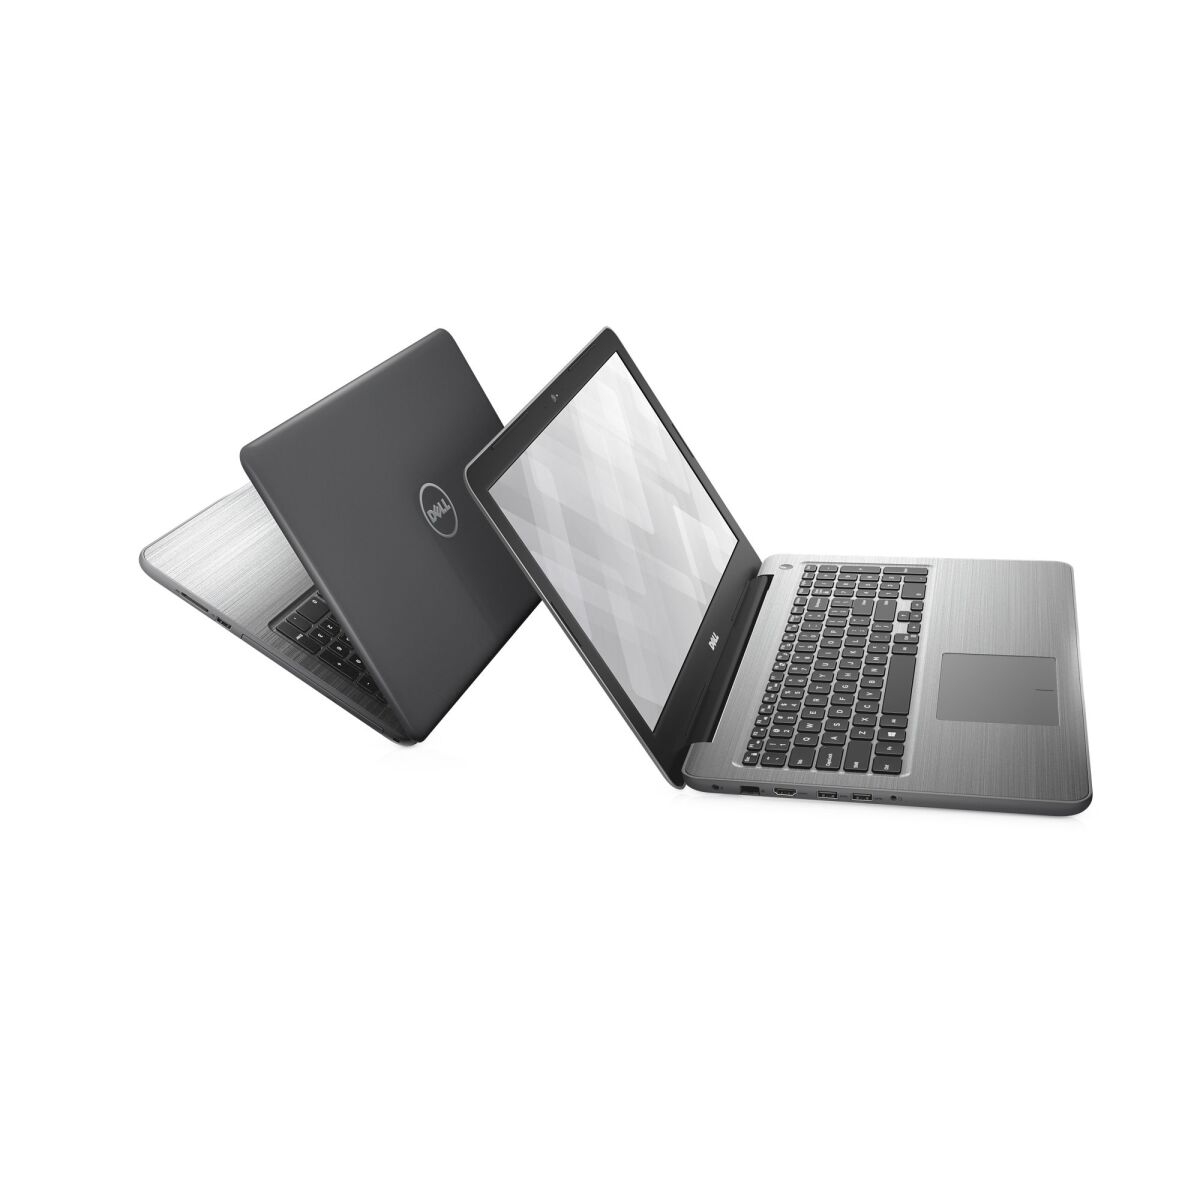 PC/タブレット ノートPC DELL Inspiron 5567 - P66F001-TI78104 laptop specifications